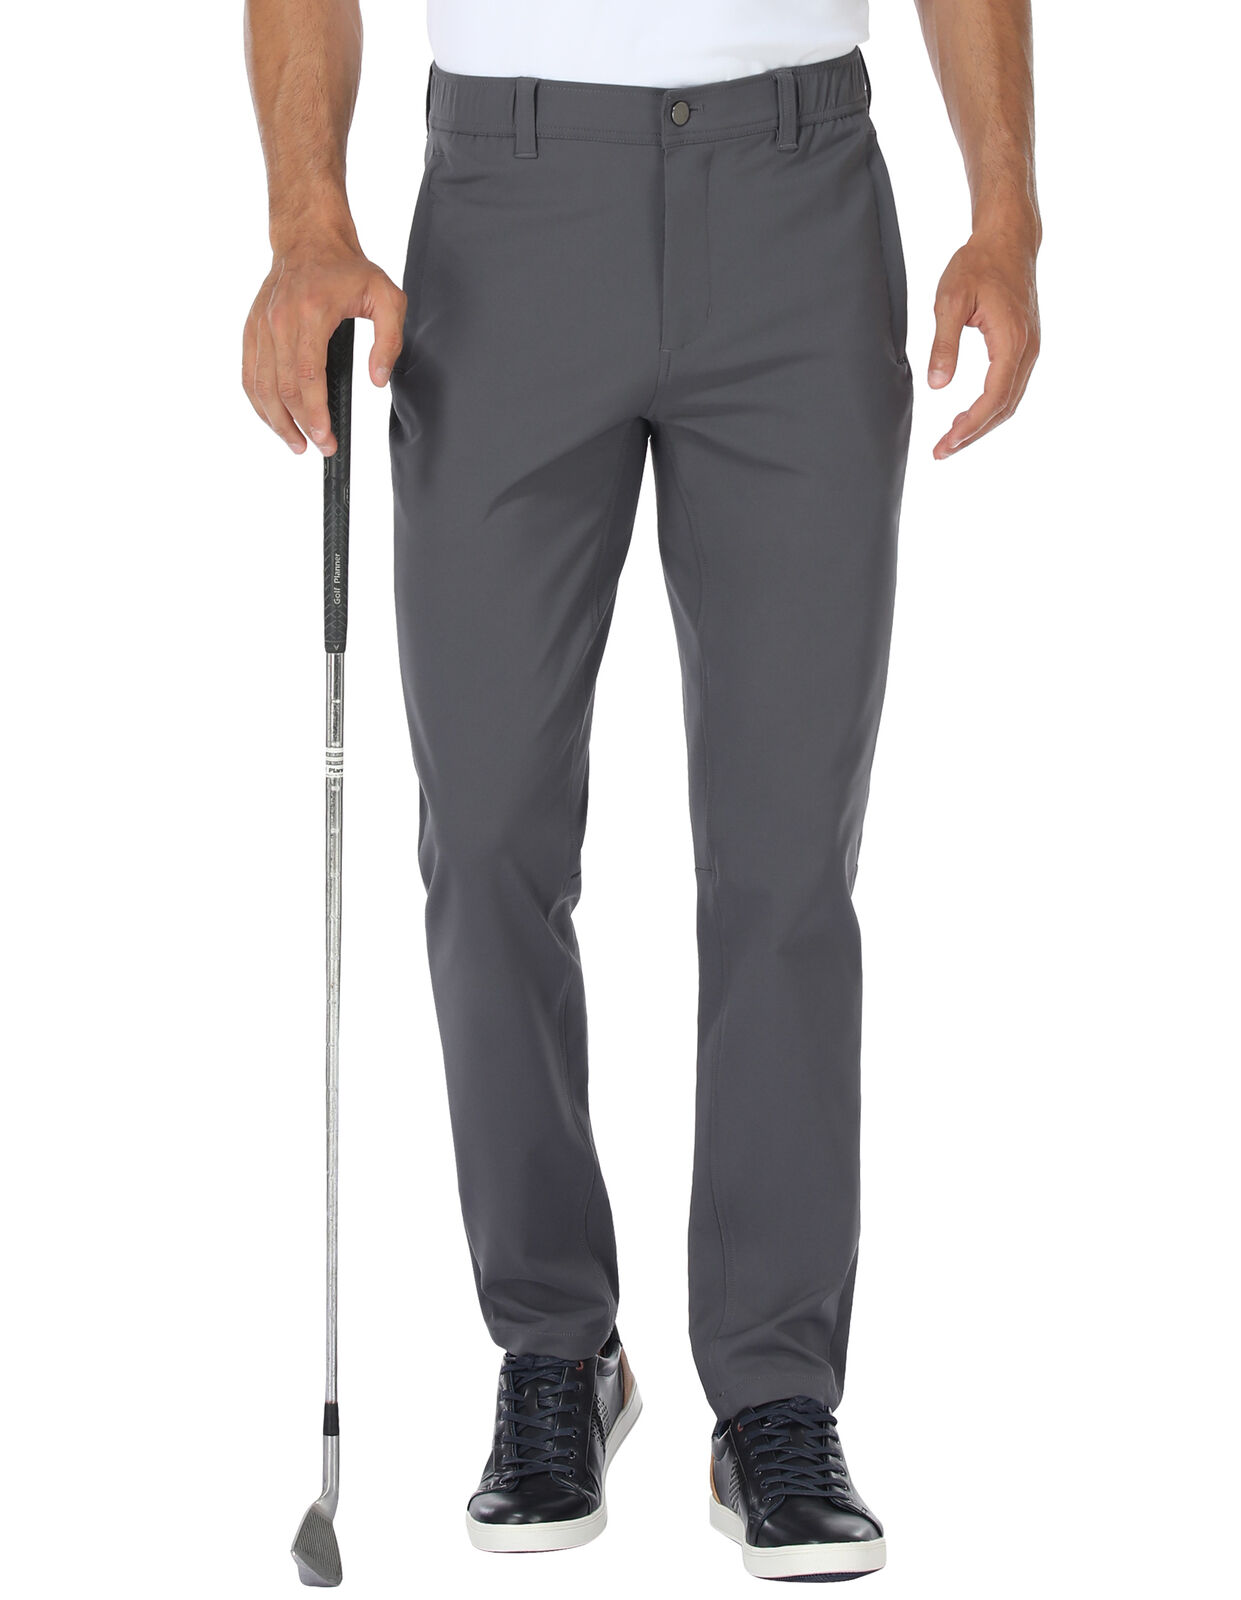 Men's Golf Dress Pants Stretch Waterproof Slim Fit Tapered Casual Chino Workwear